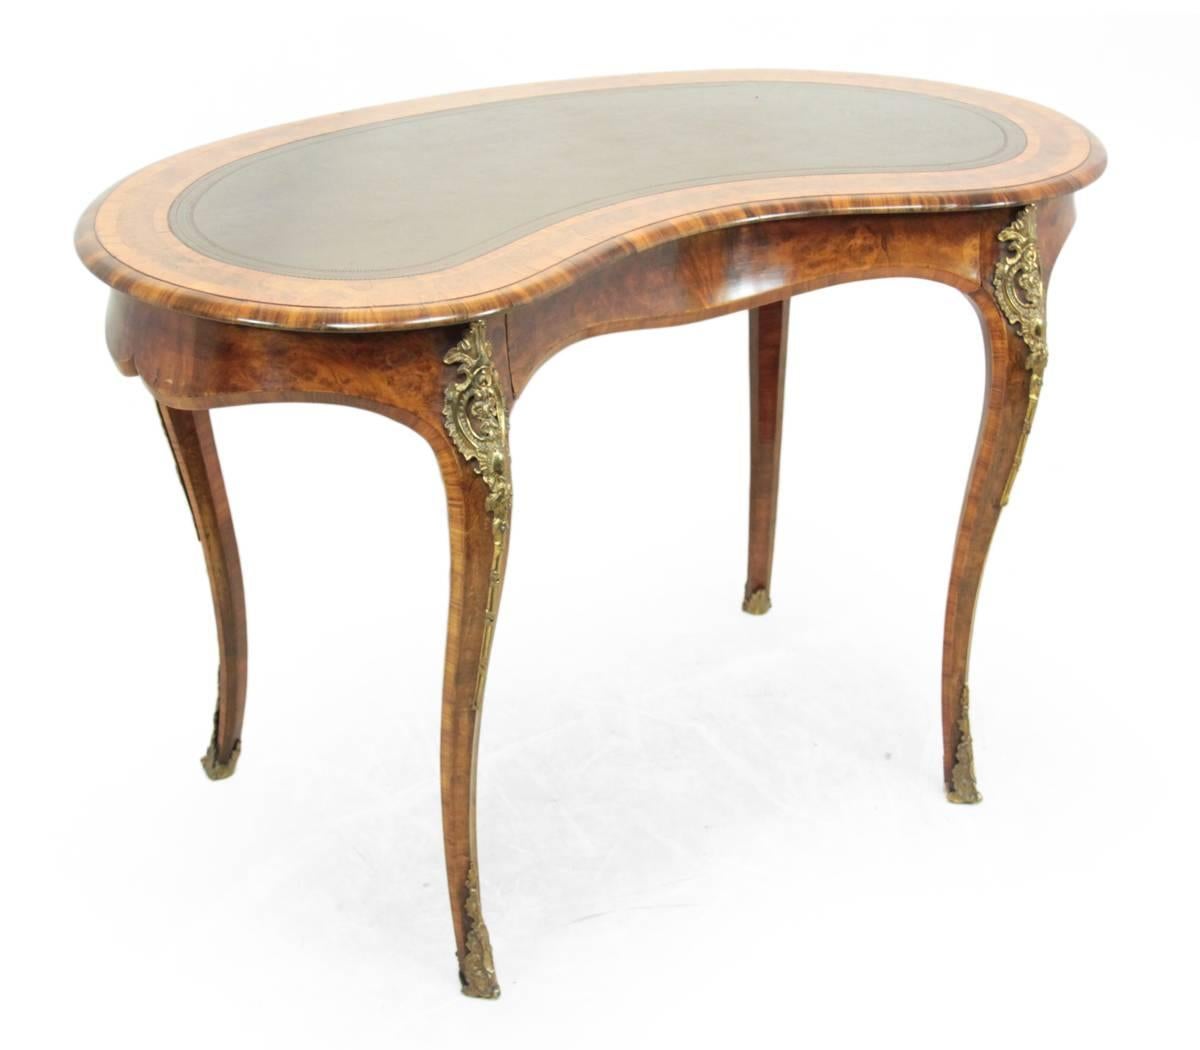 French Provincial Kidney Shaped Ladies Writing Table, circa 1860